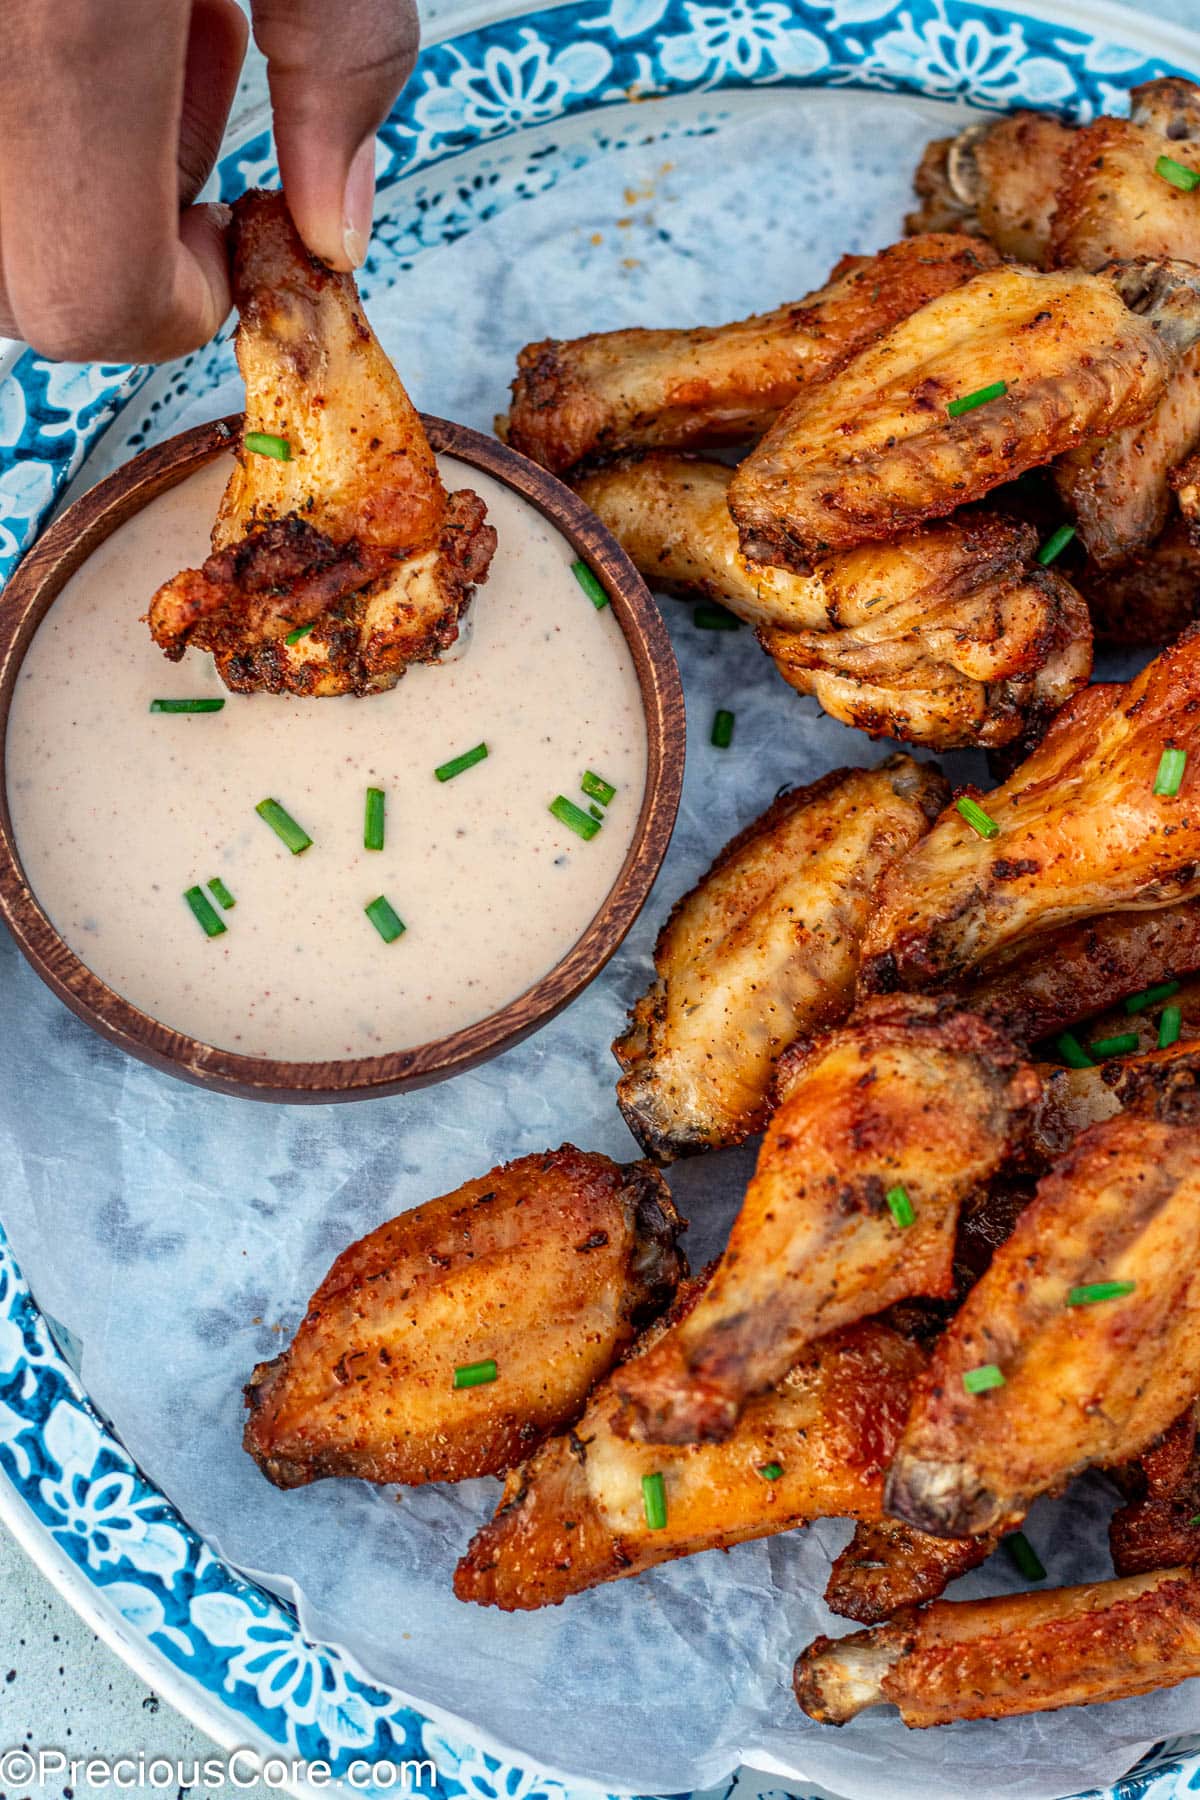 Dipping a wing into ranch.